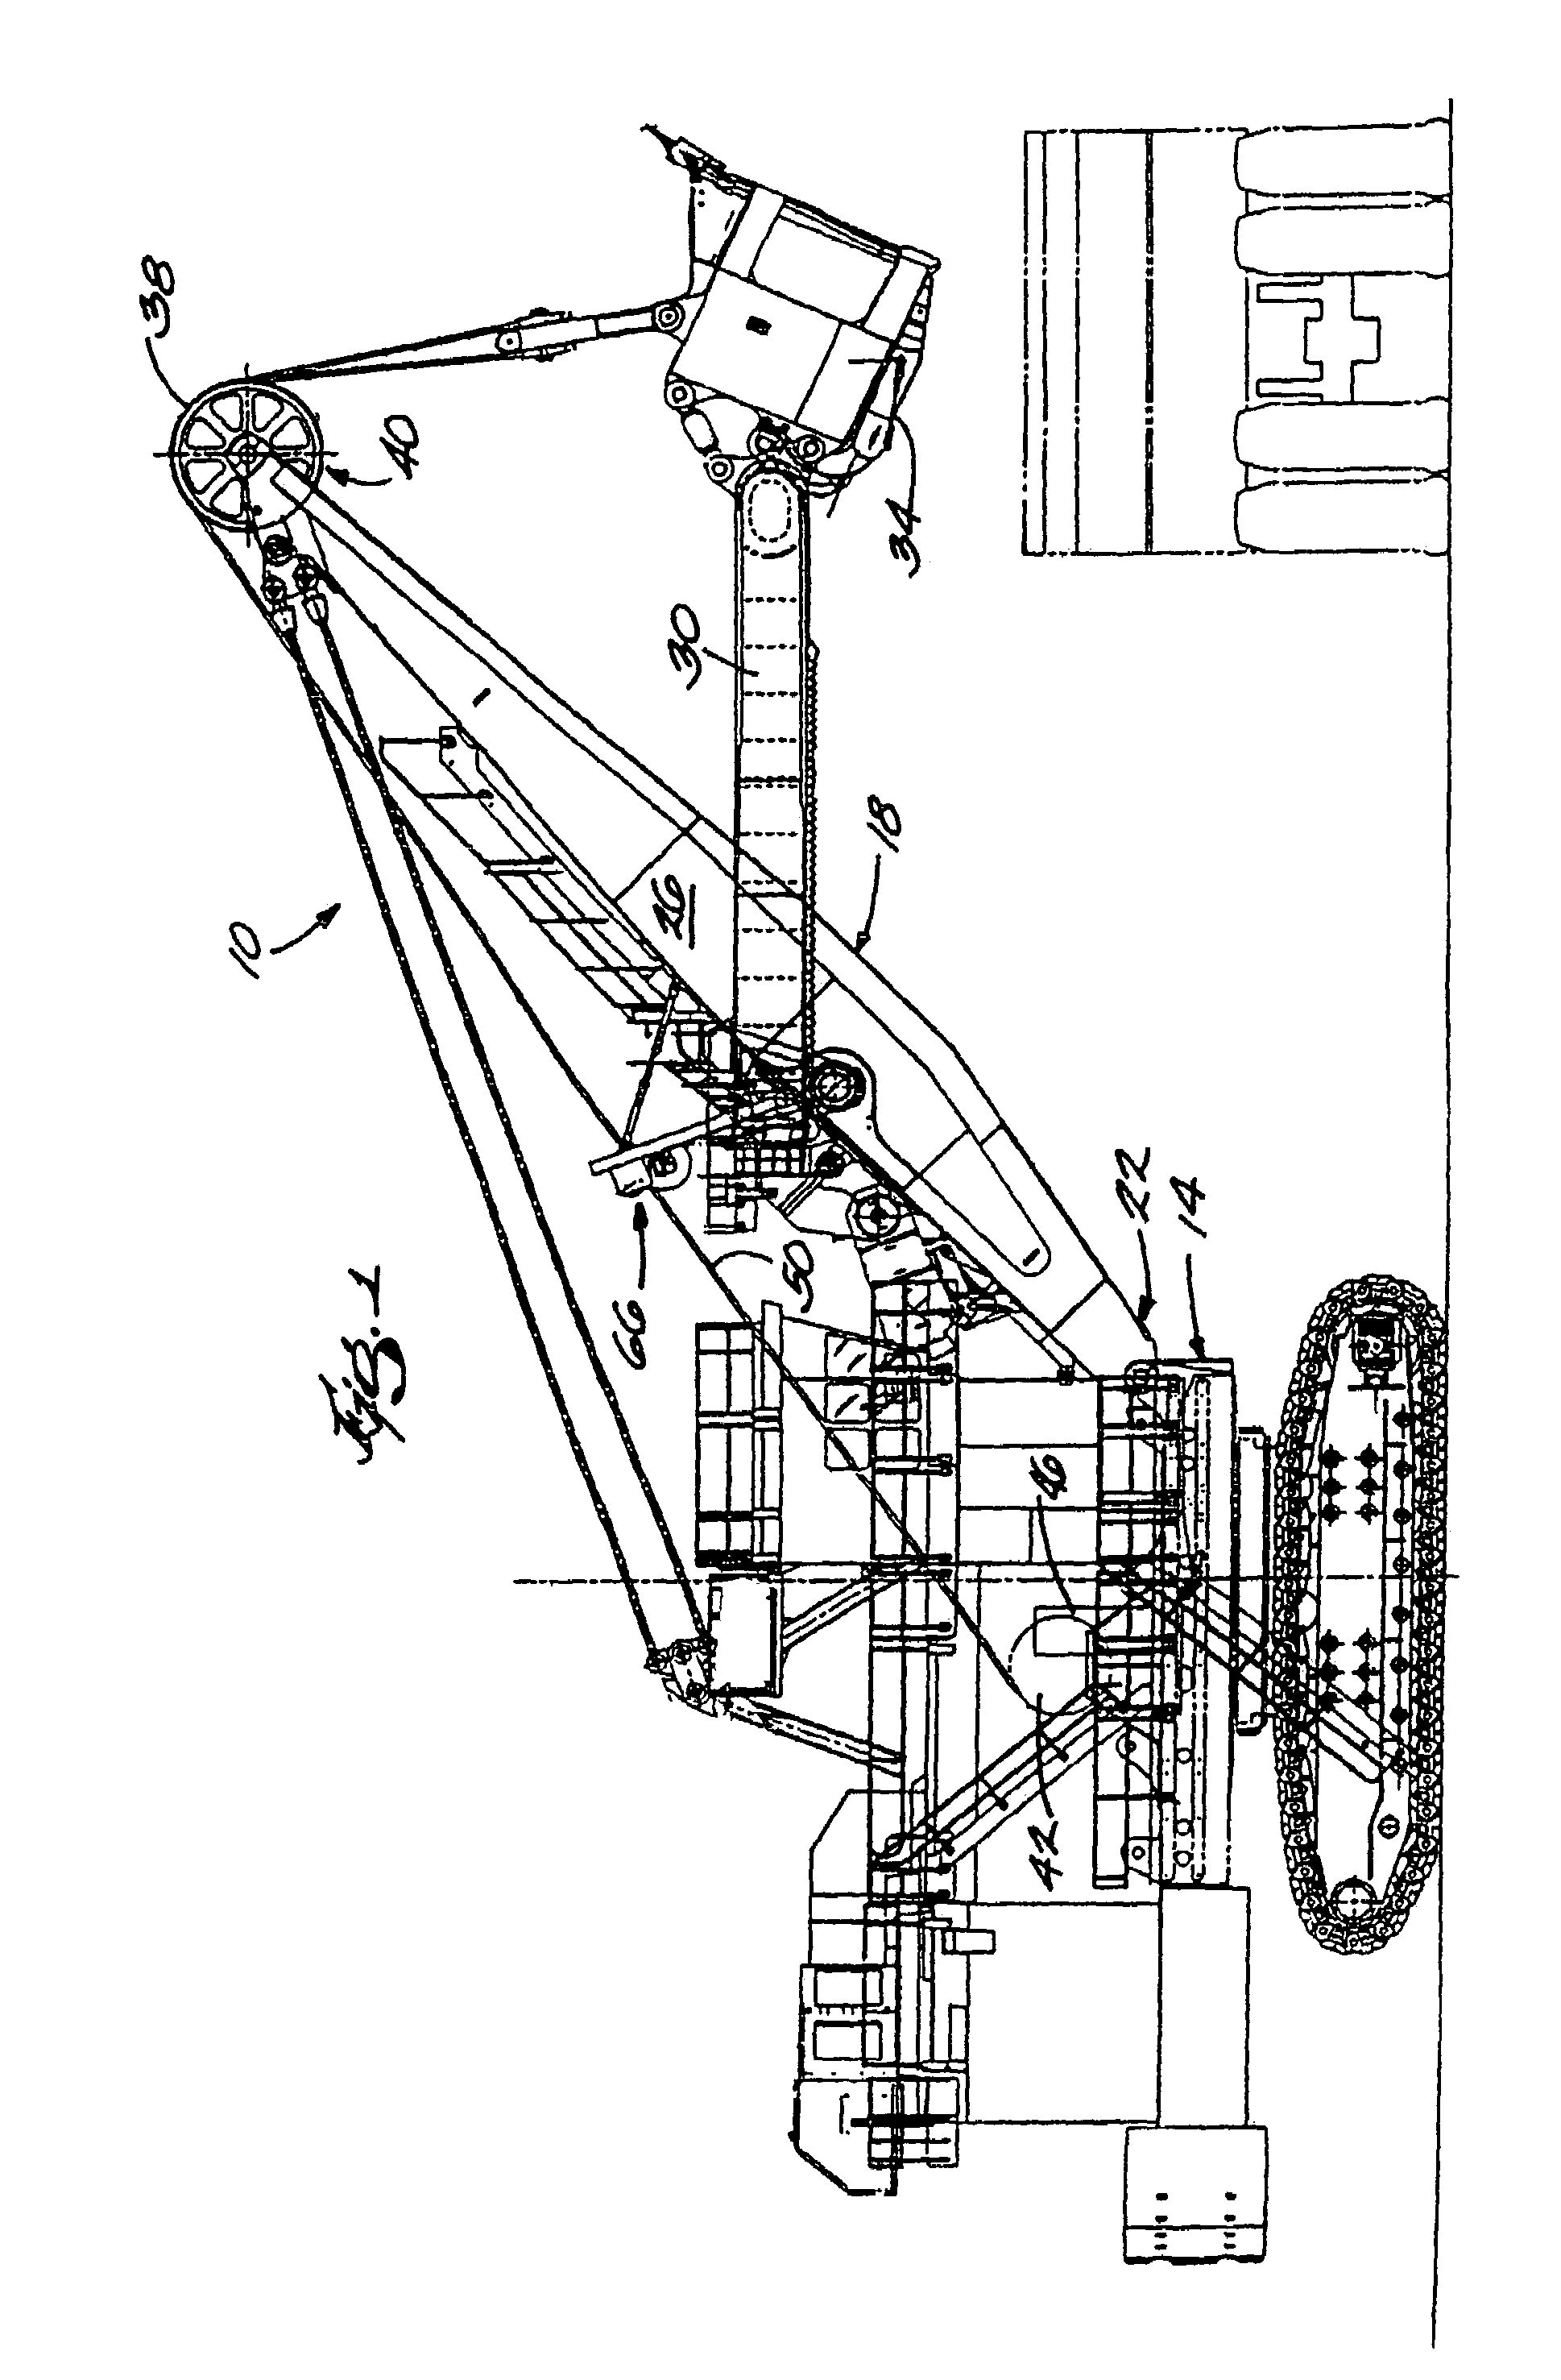 Auxiliary assembly for reducing unwanted movement of a hoist rope